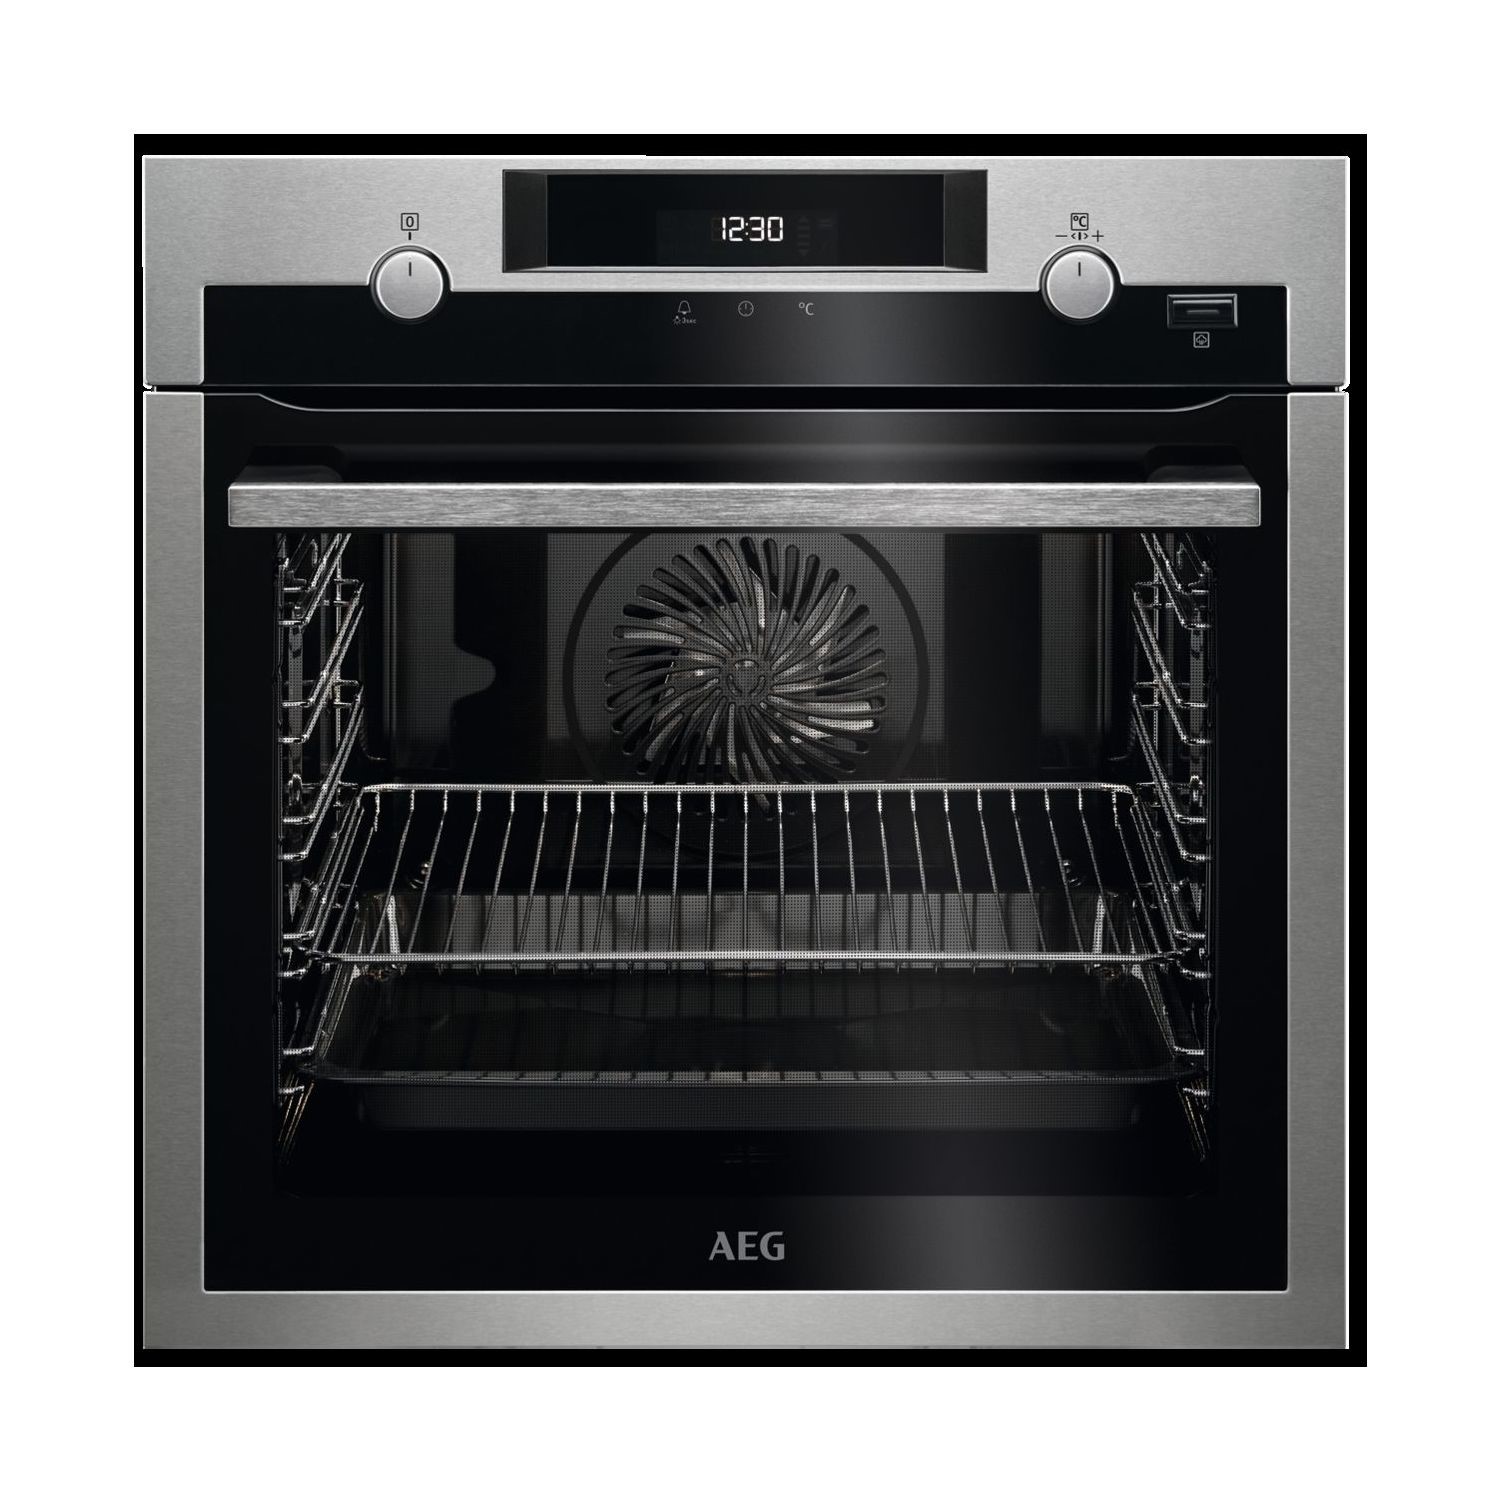 Refurbished AEG BPS555020M 60cm Single Built In Electric Oven Stainless Steel